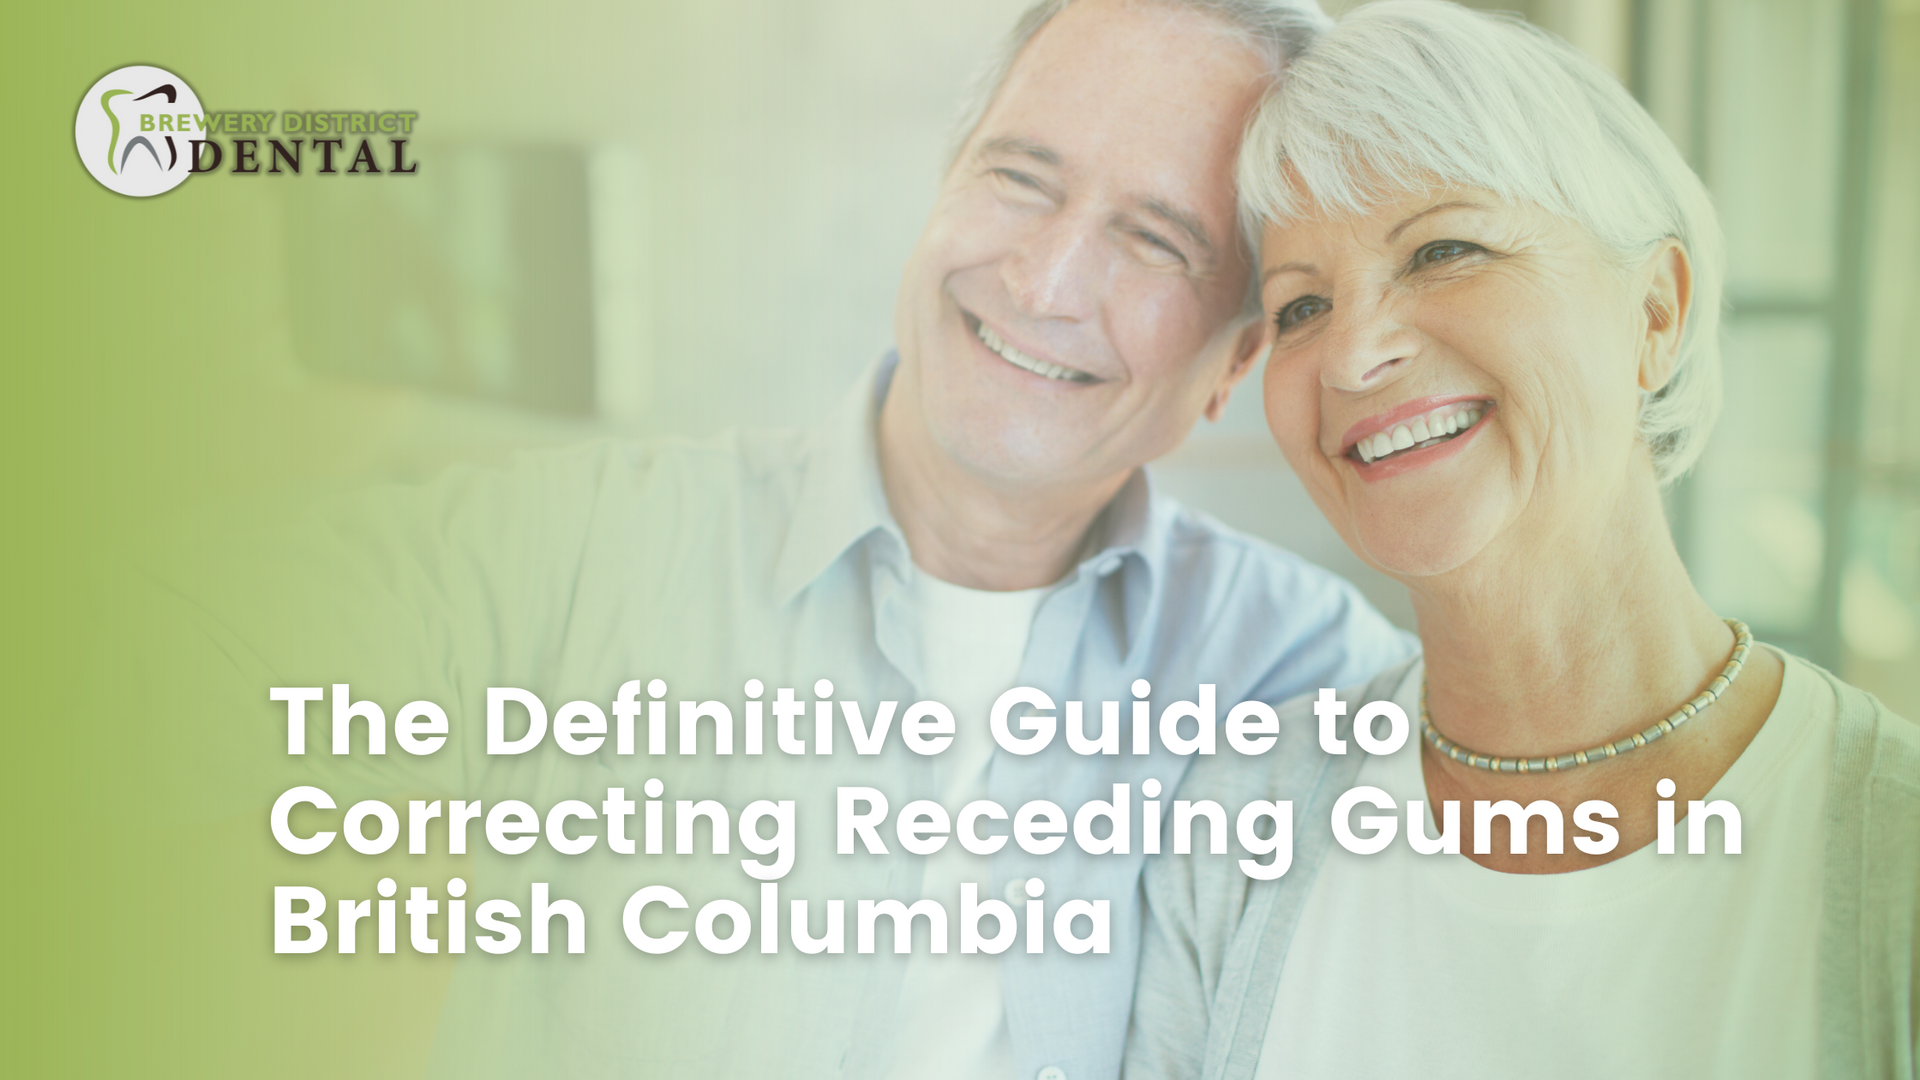 Mature couple taking a selfie with title The Definitive Guide to Correcting Receding Gums in British